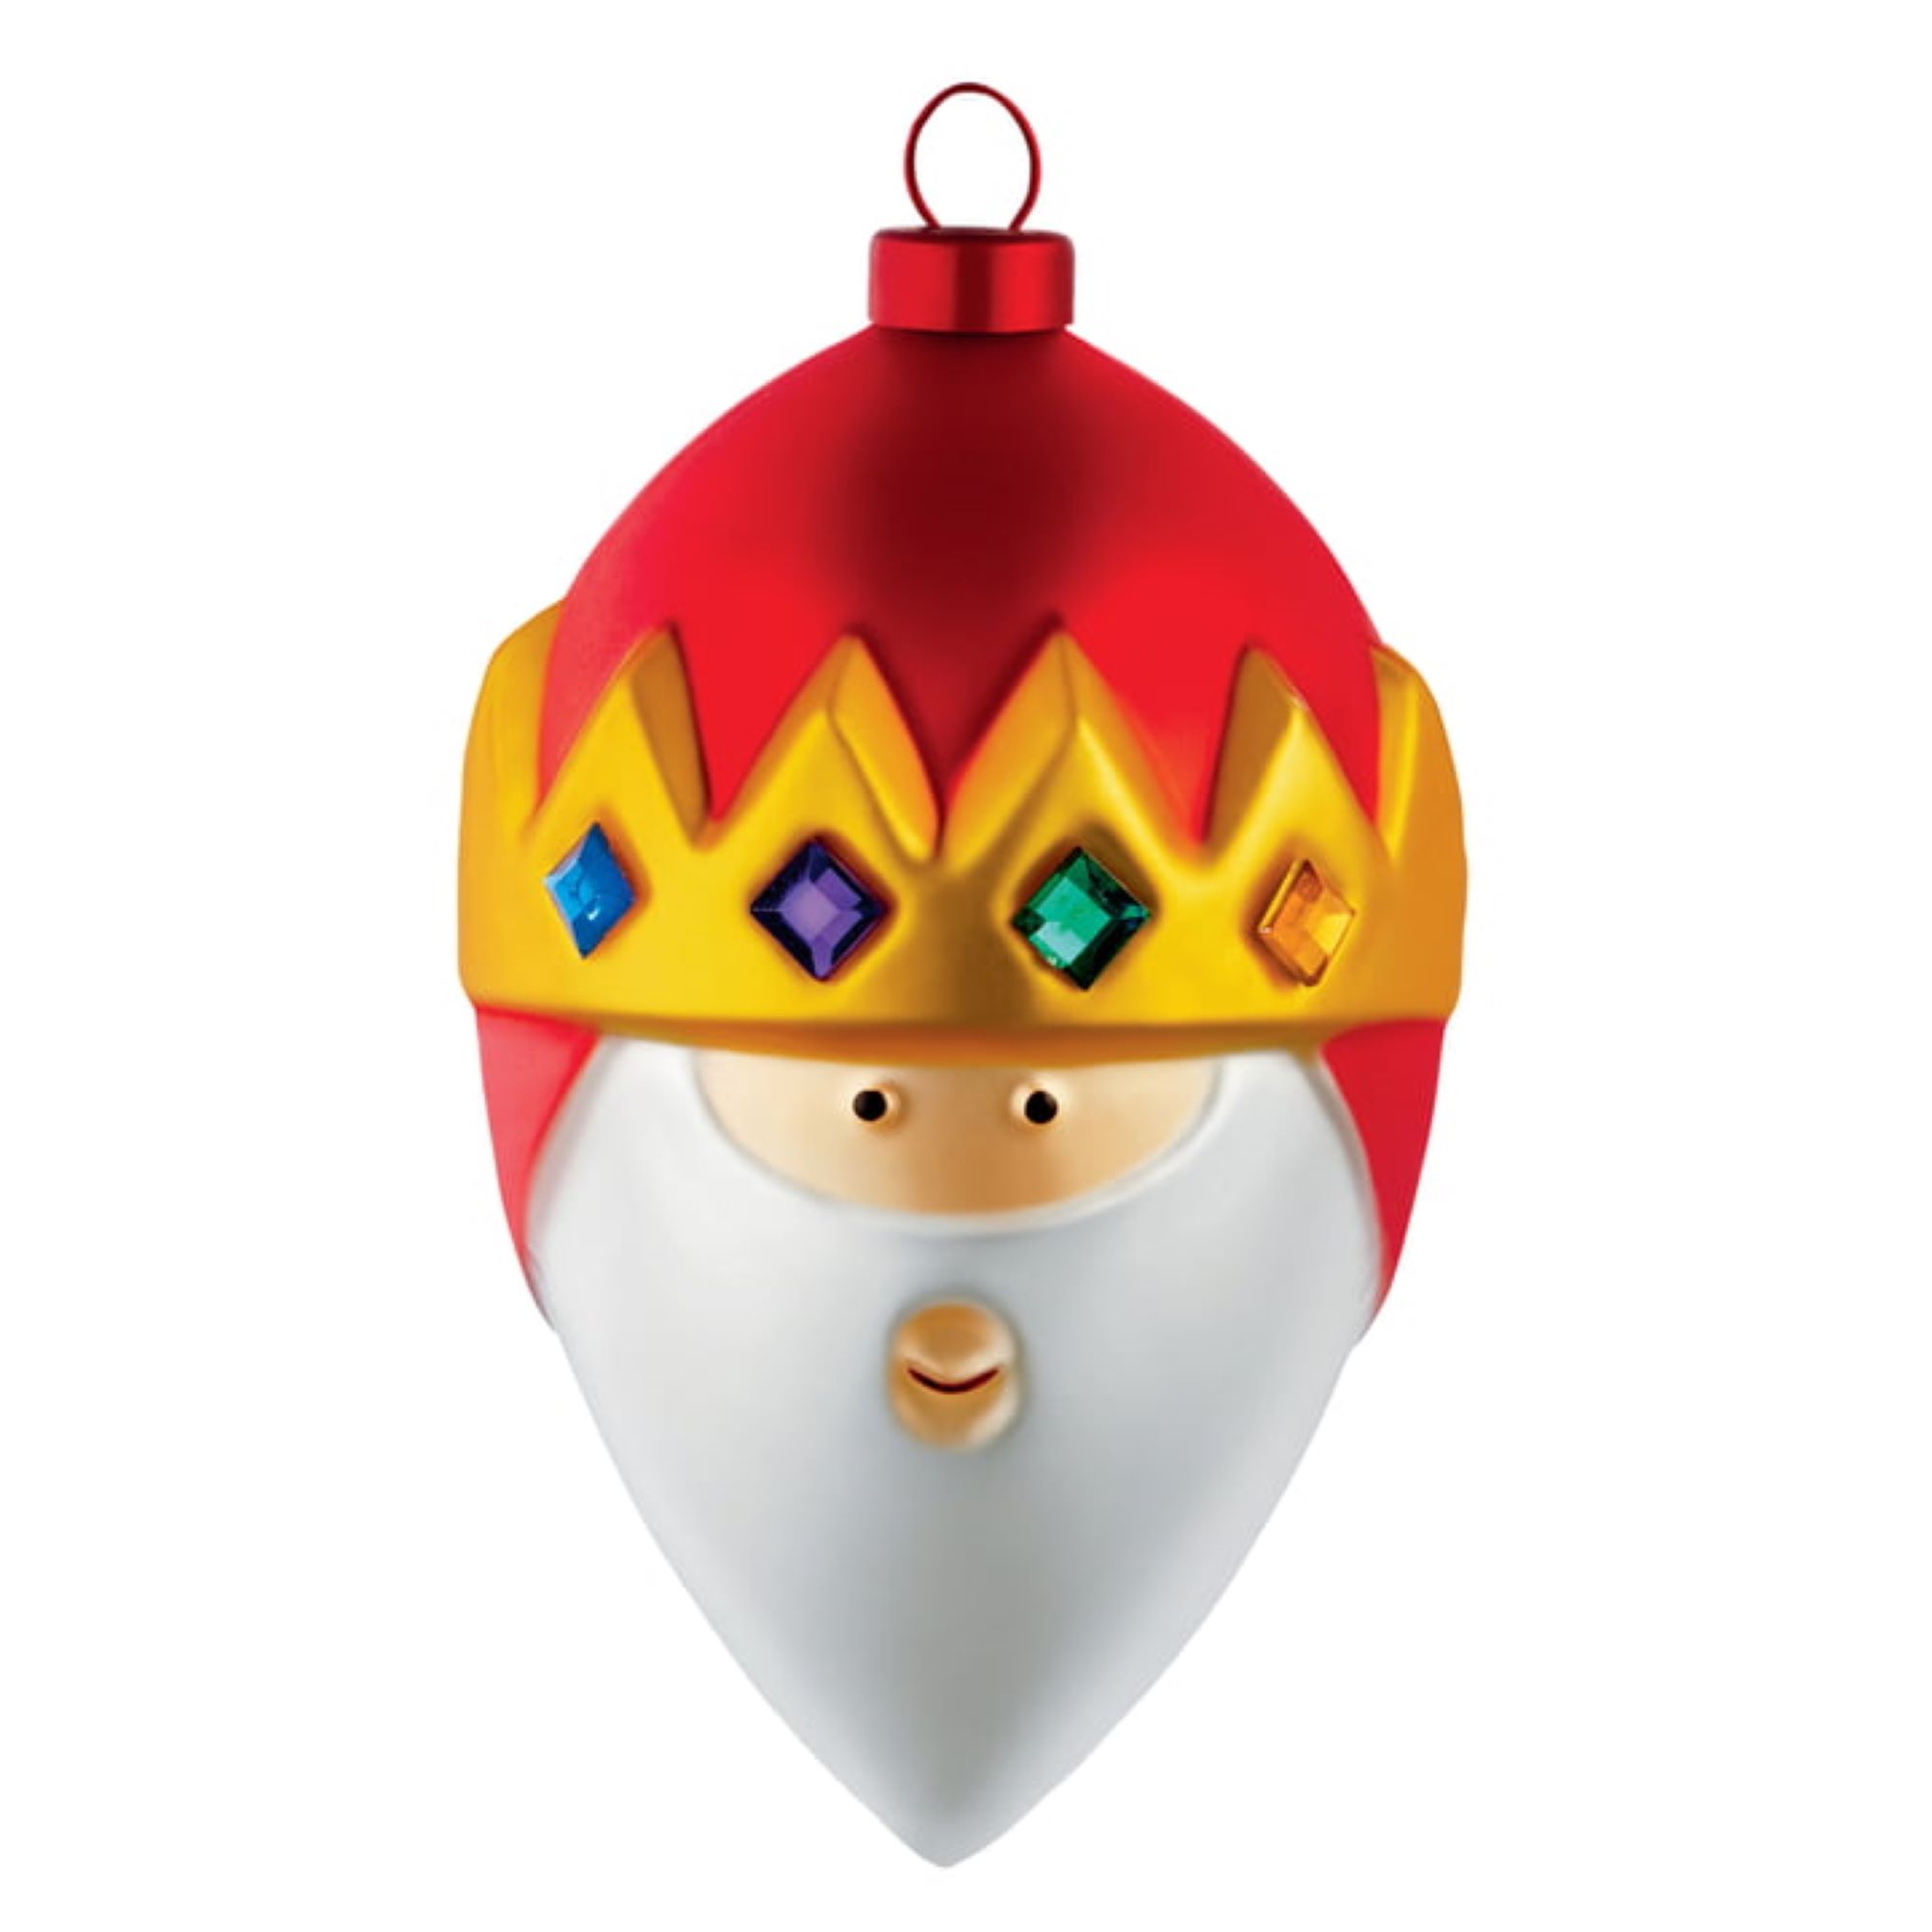 Alessi Gaspare - Three Wise Men Christmas bauble